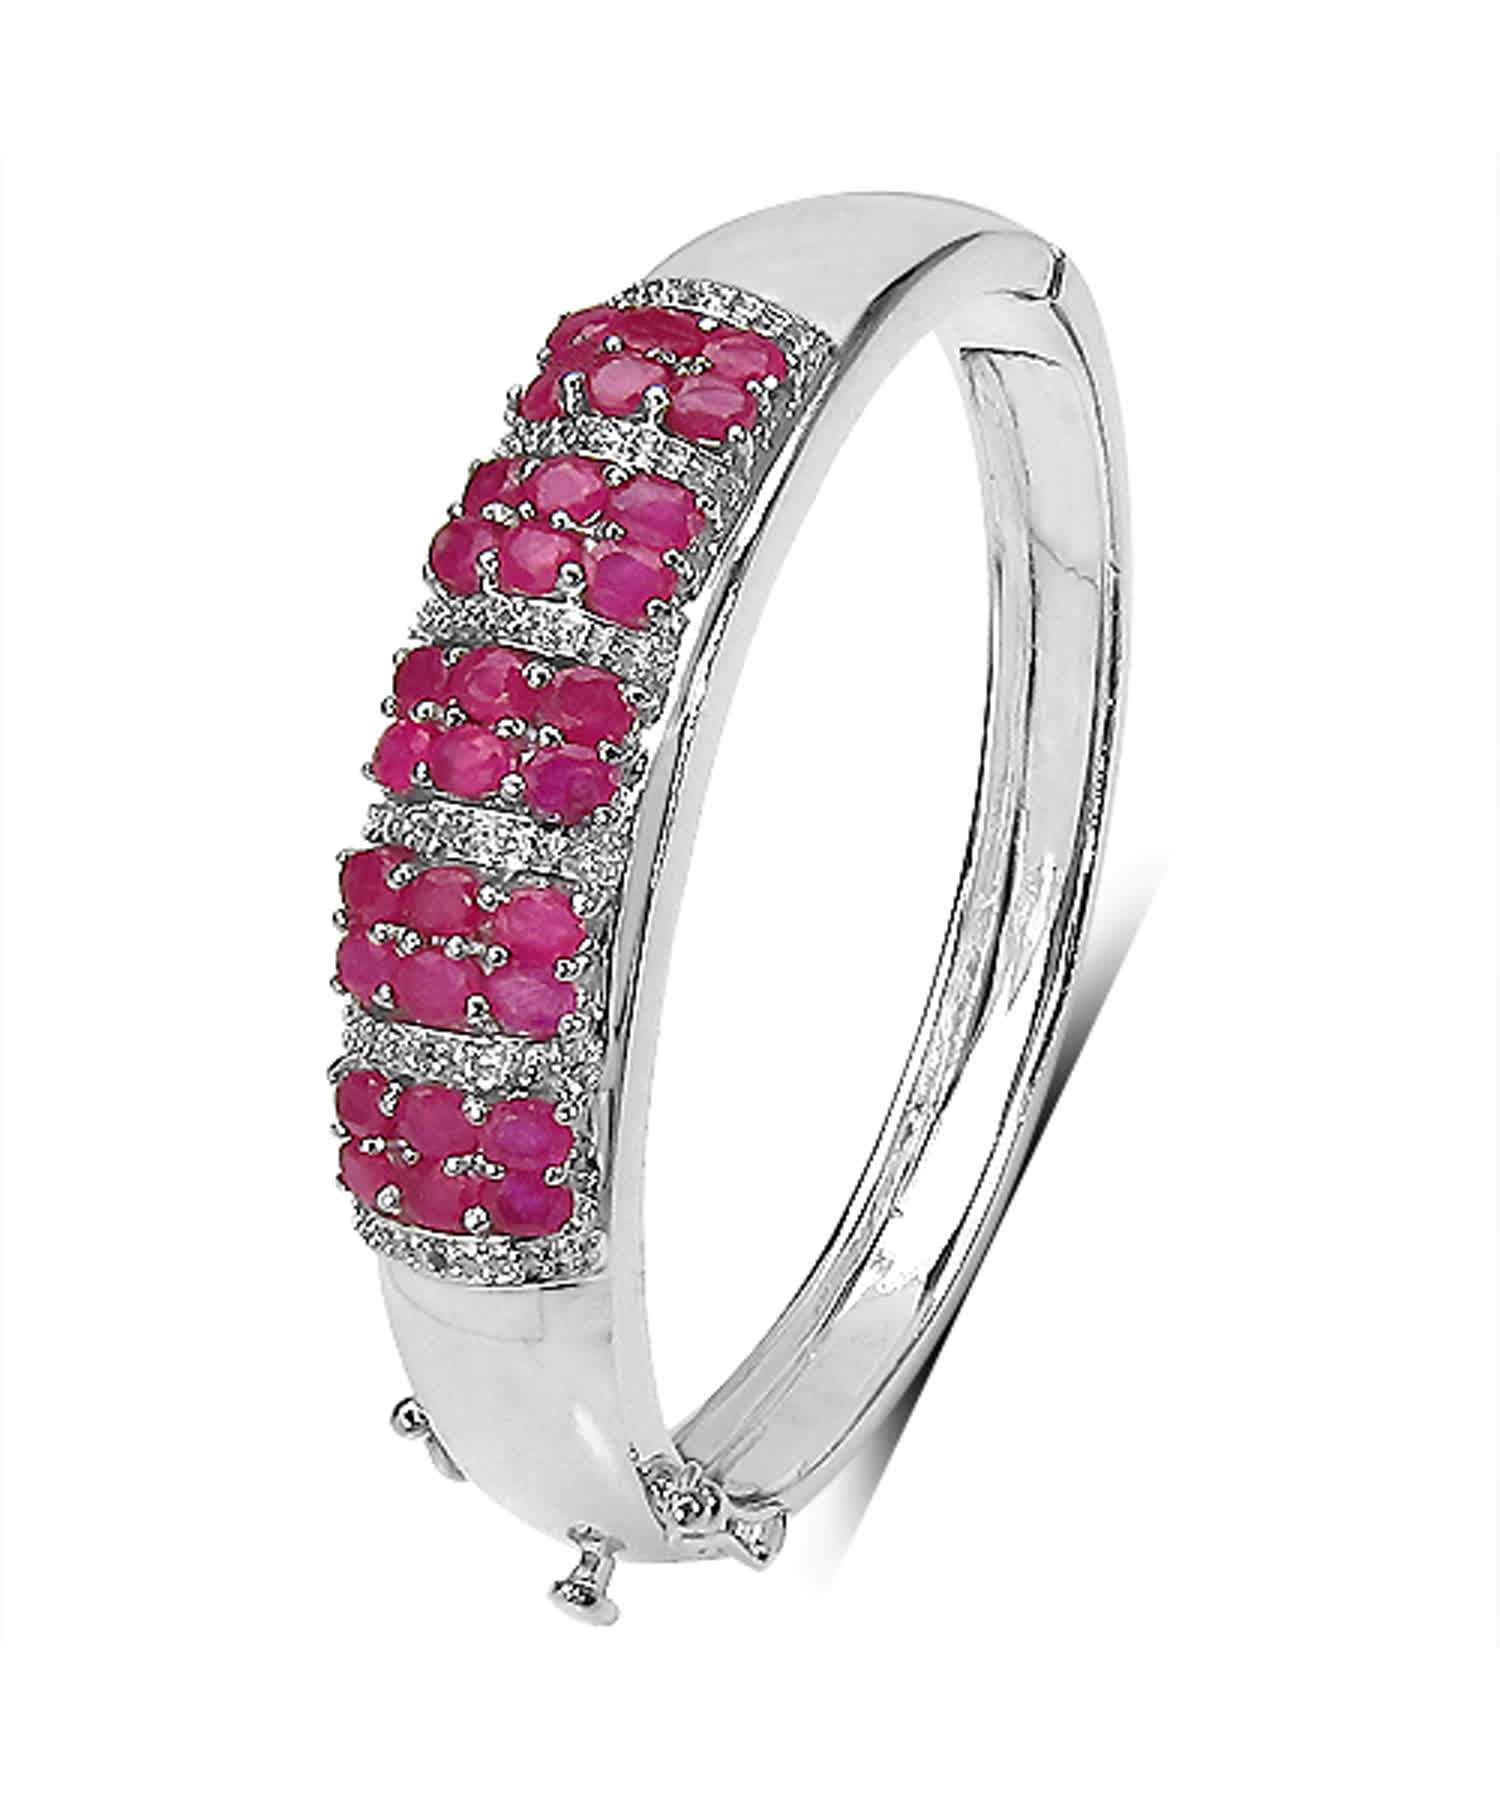 6.65ctw Natural Ruby and Topaz Rhodium Plated 925 Sterling Silver Bangle Bracelet View 1